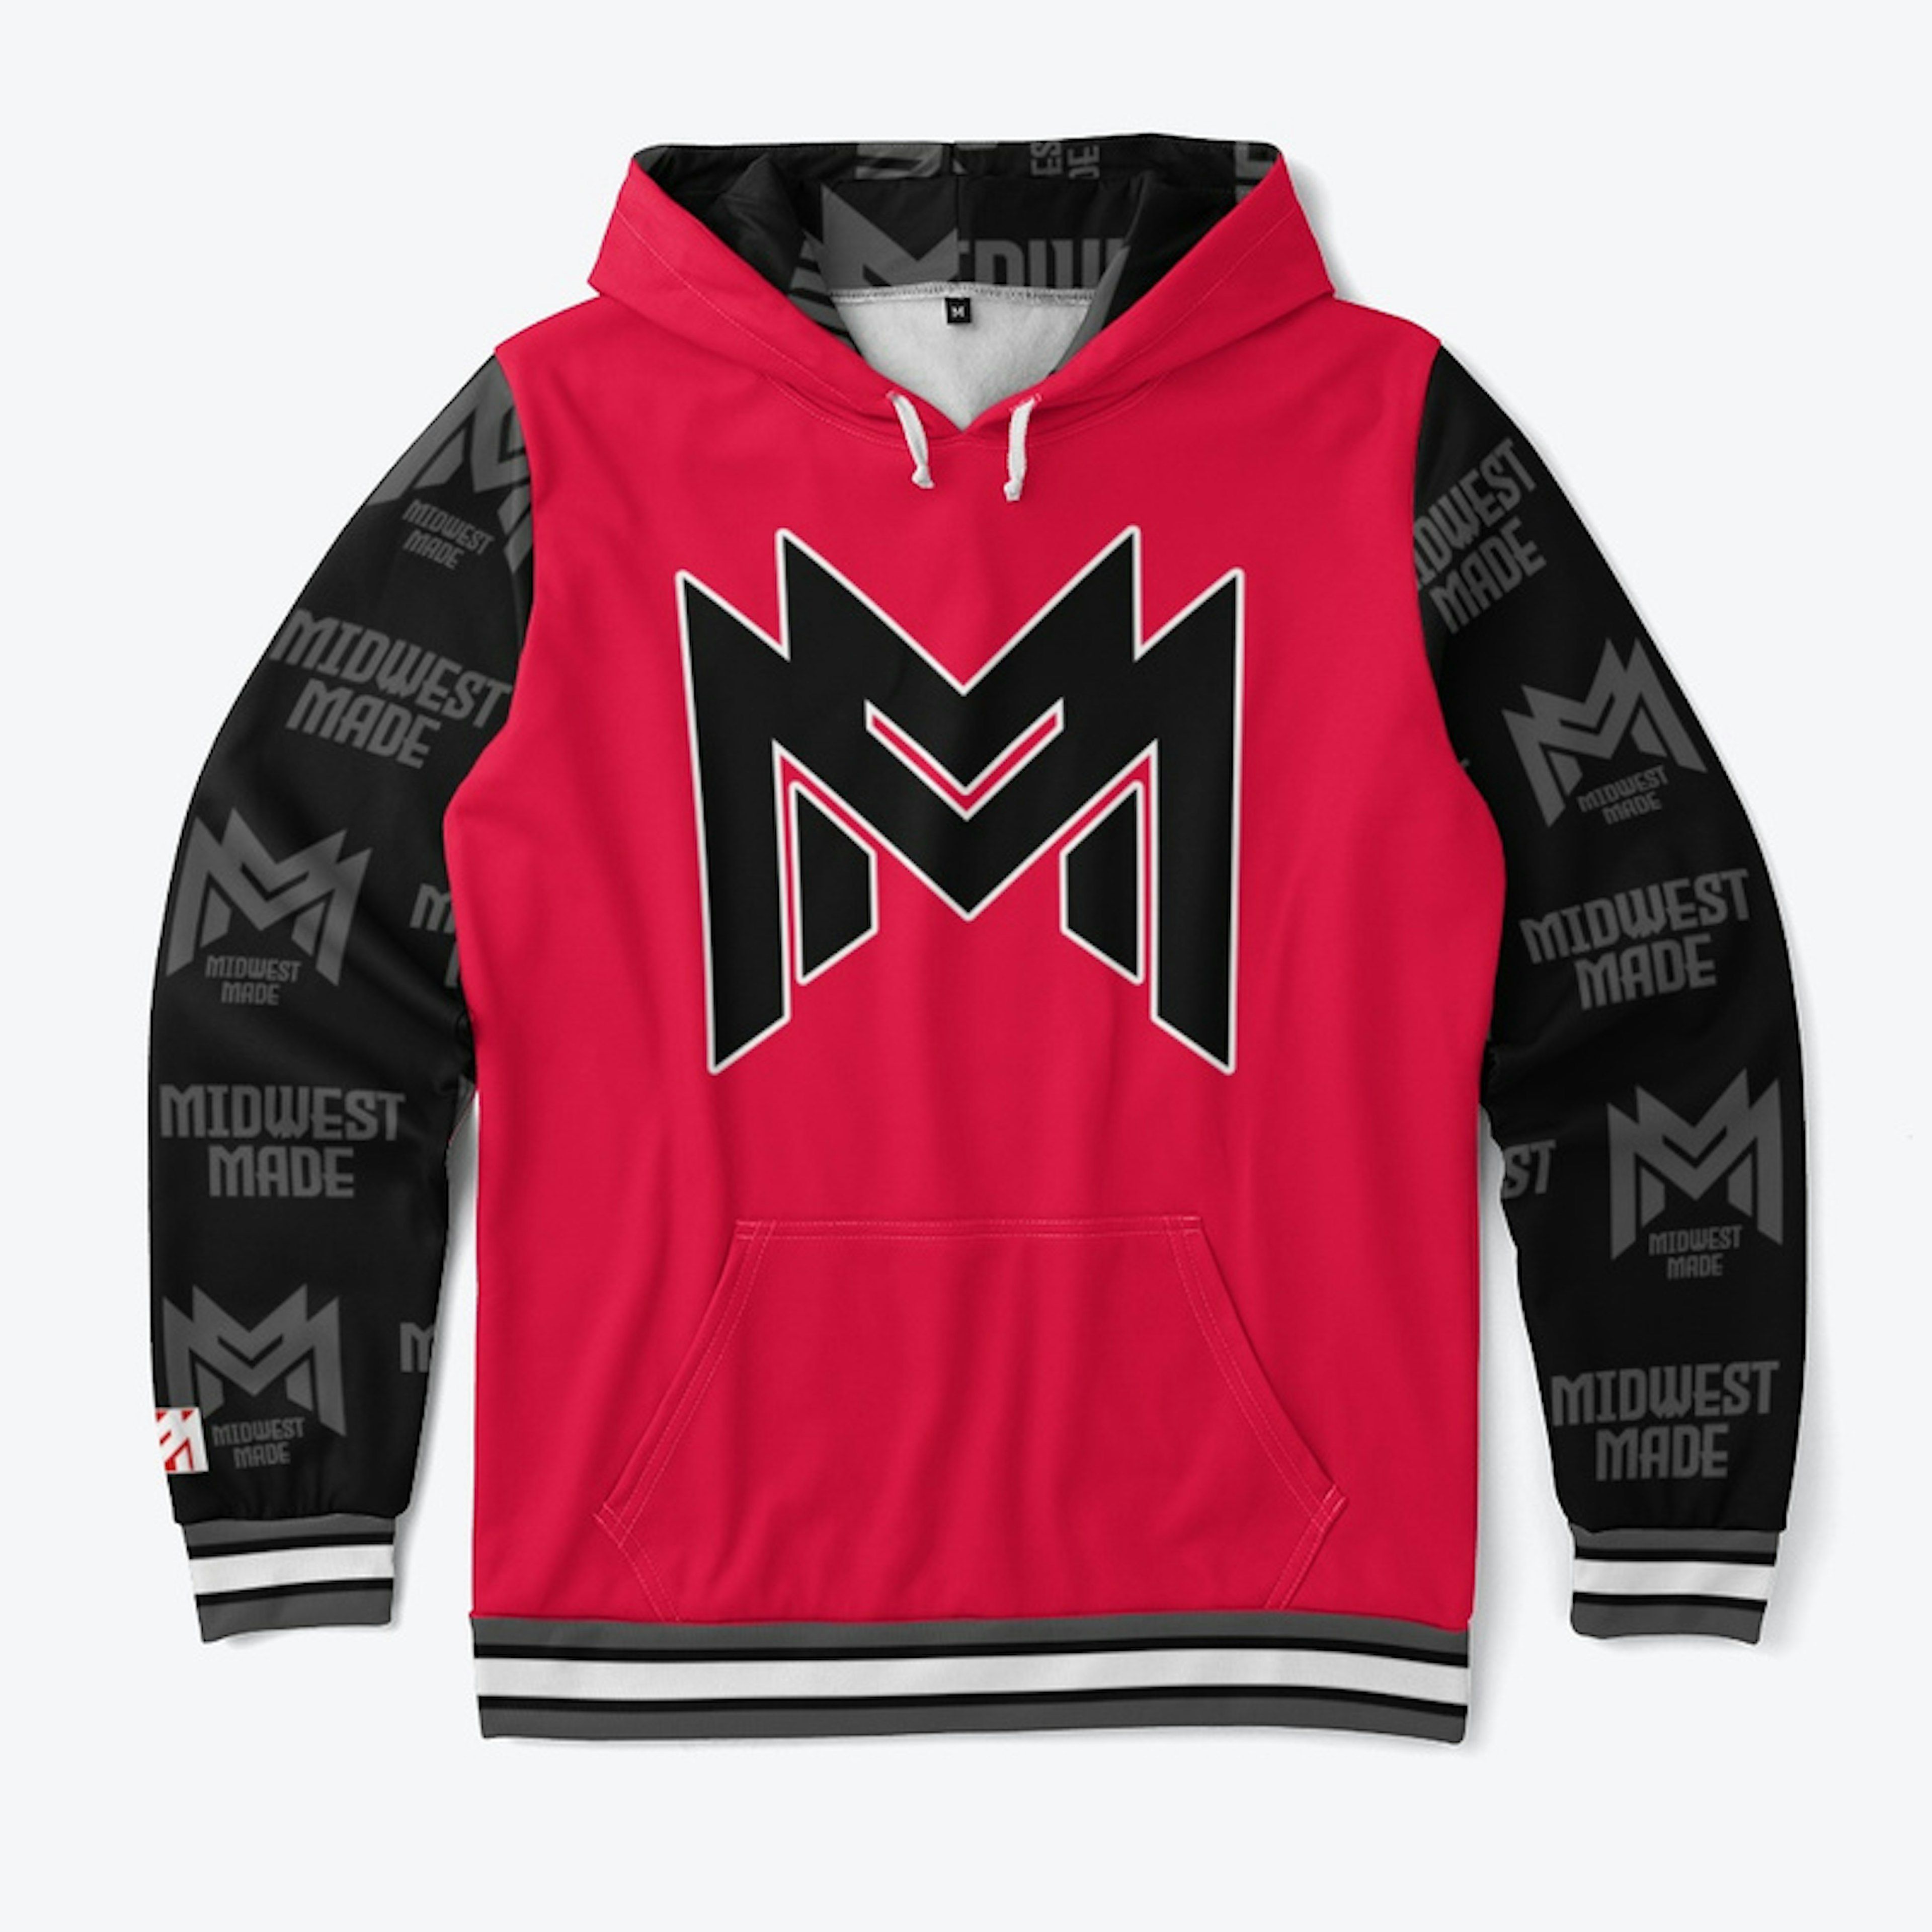 Midwest Made - "In The Game" Hoodie